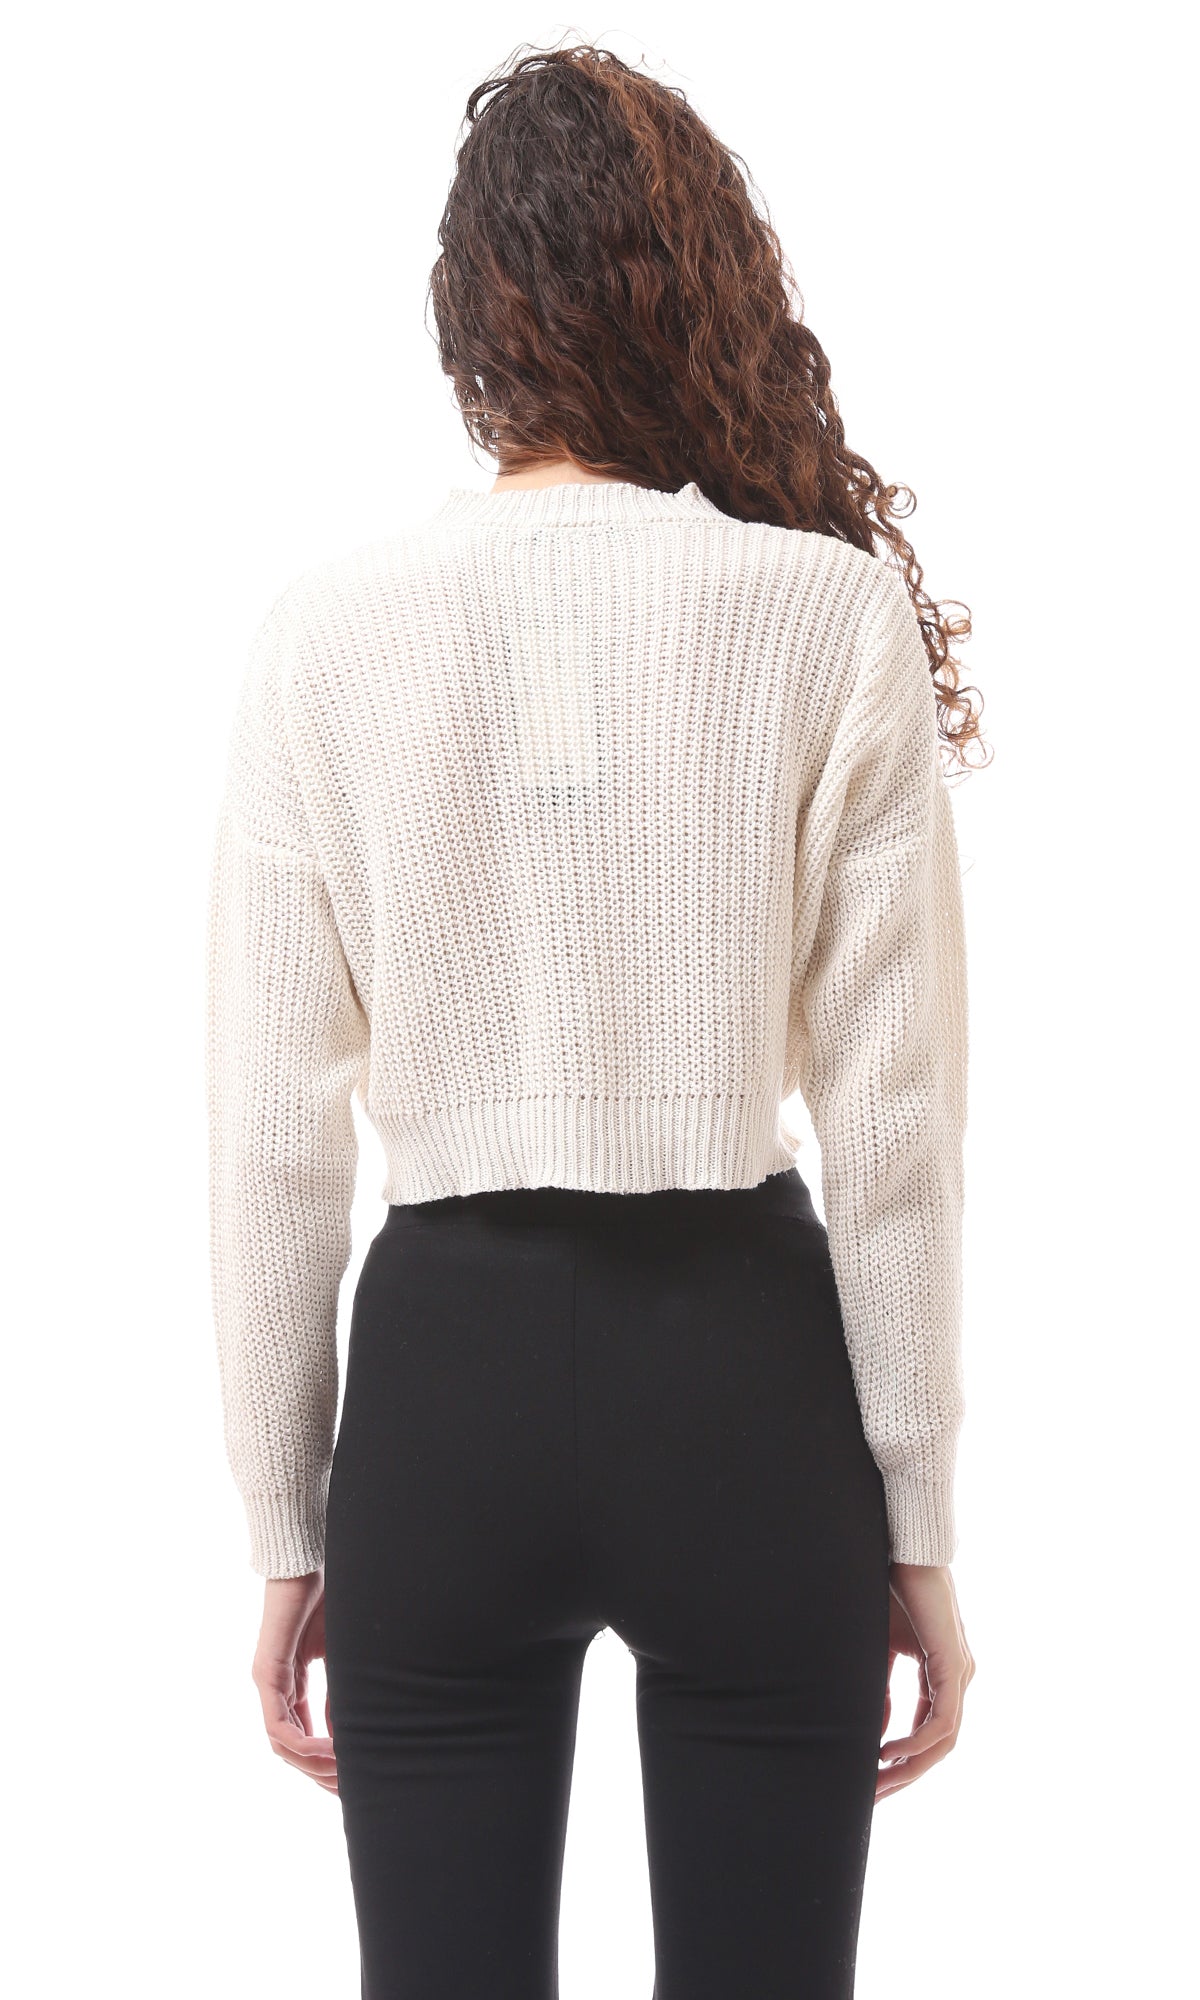 O171370 Cropped Knitted Acrylic Long Sleeved Pullover